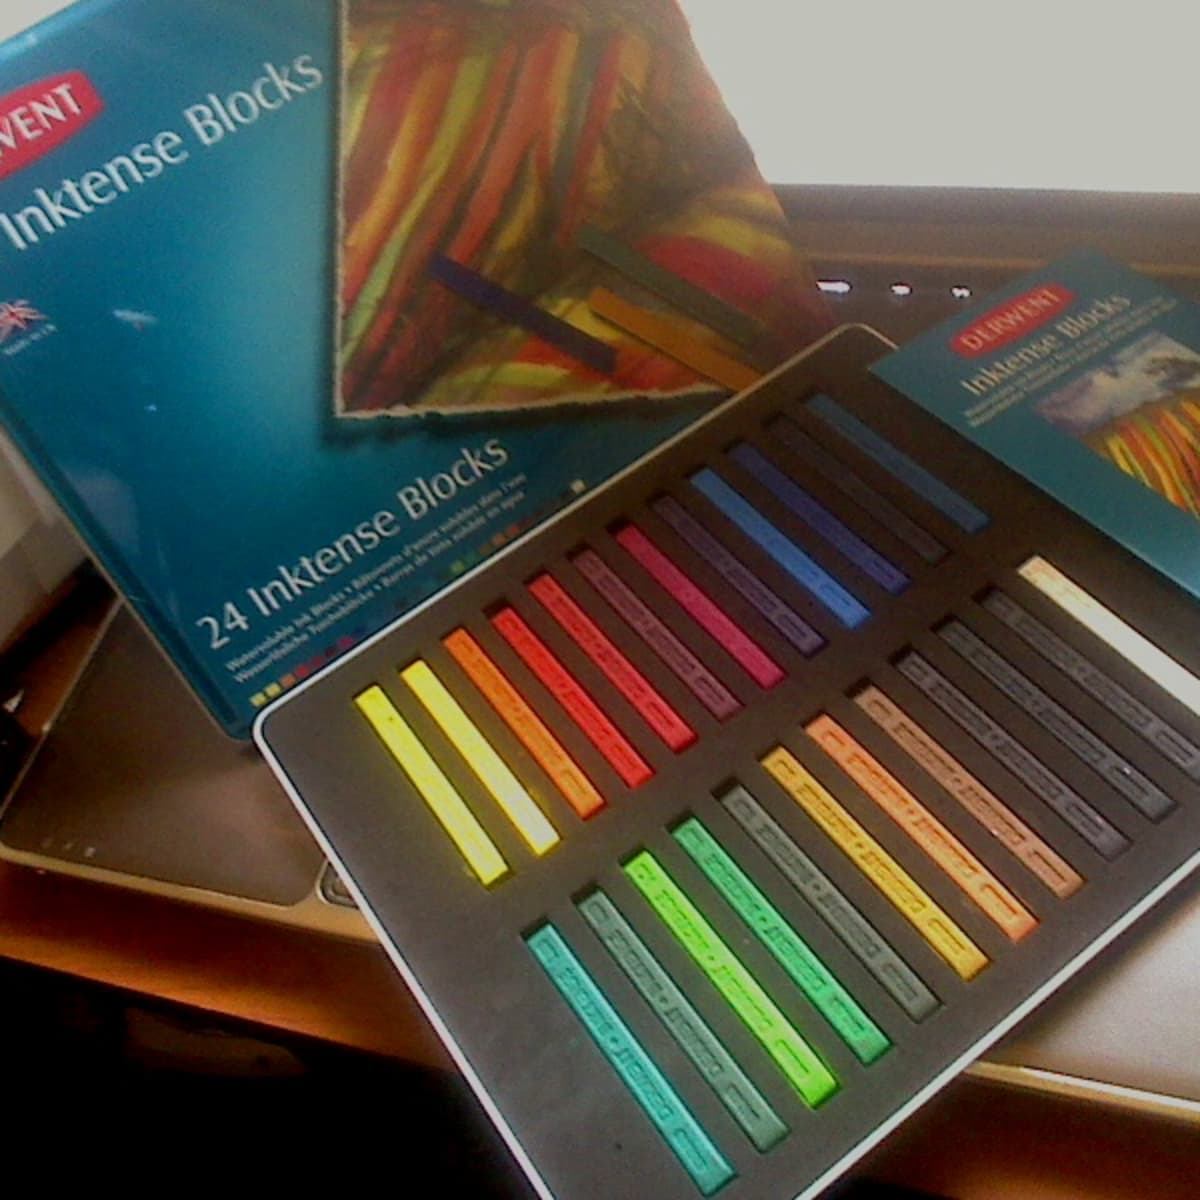 Colored Pencils for Artists: The Ultimate Review - FeltMagnet